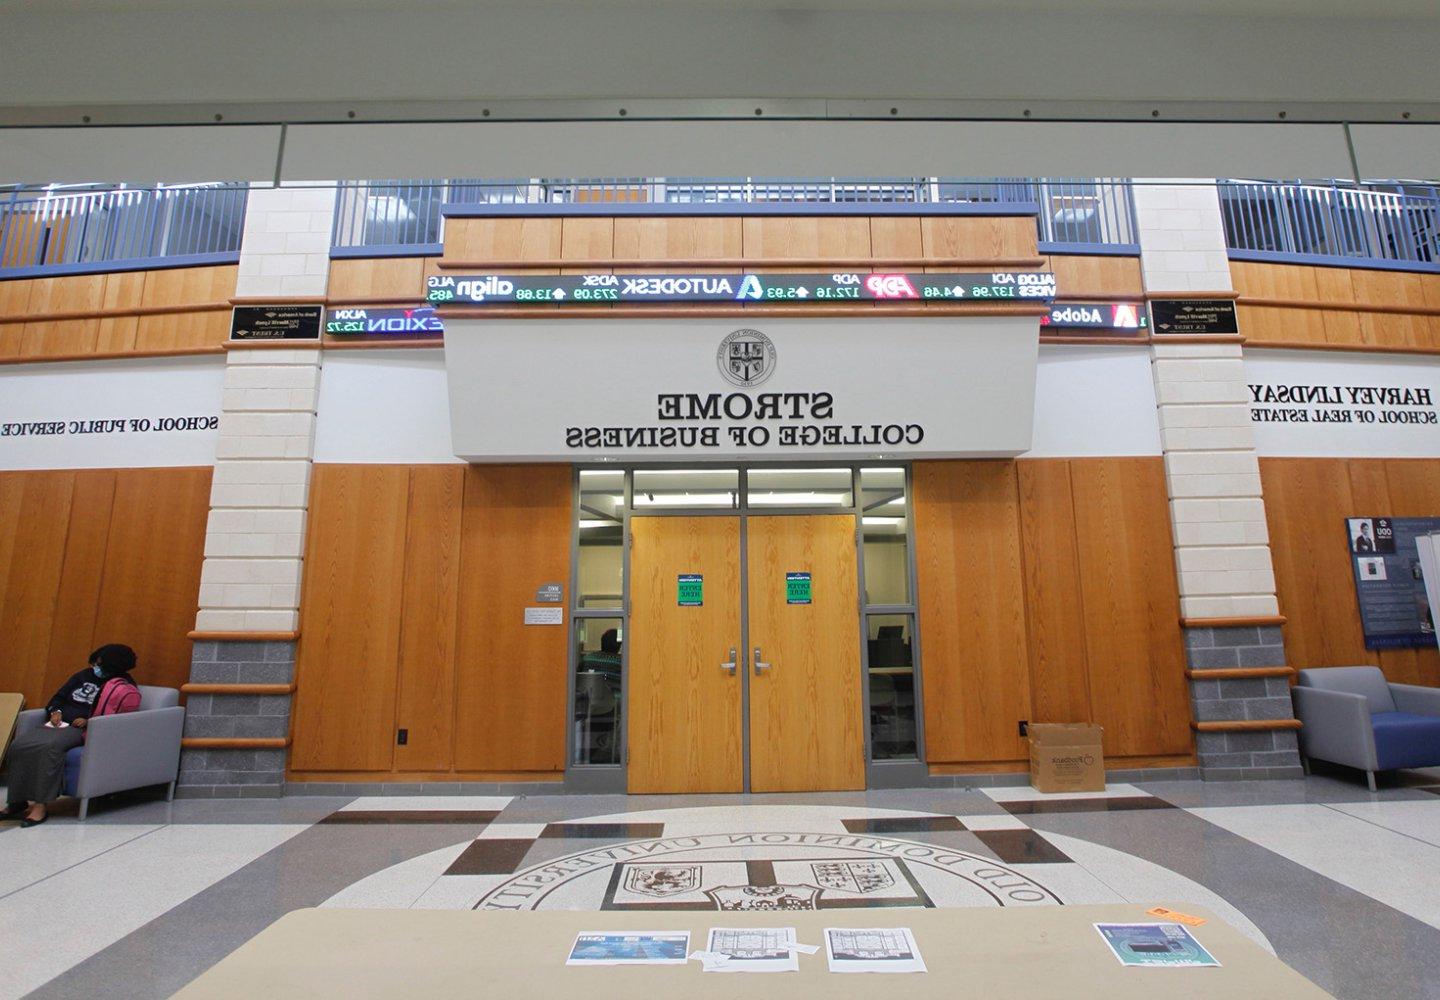 Strome College of Business Interior Doors and ticker